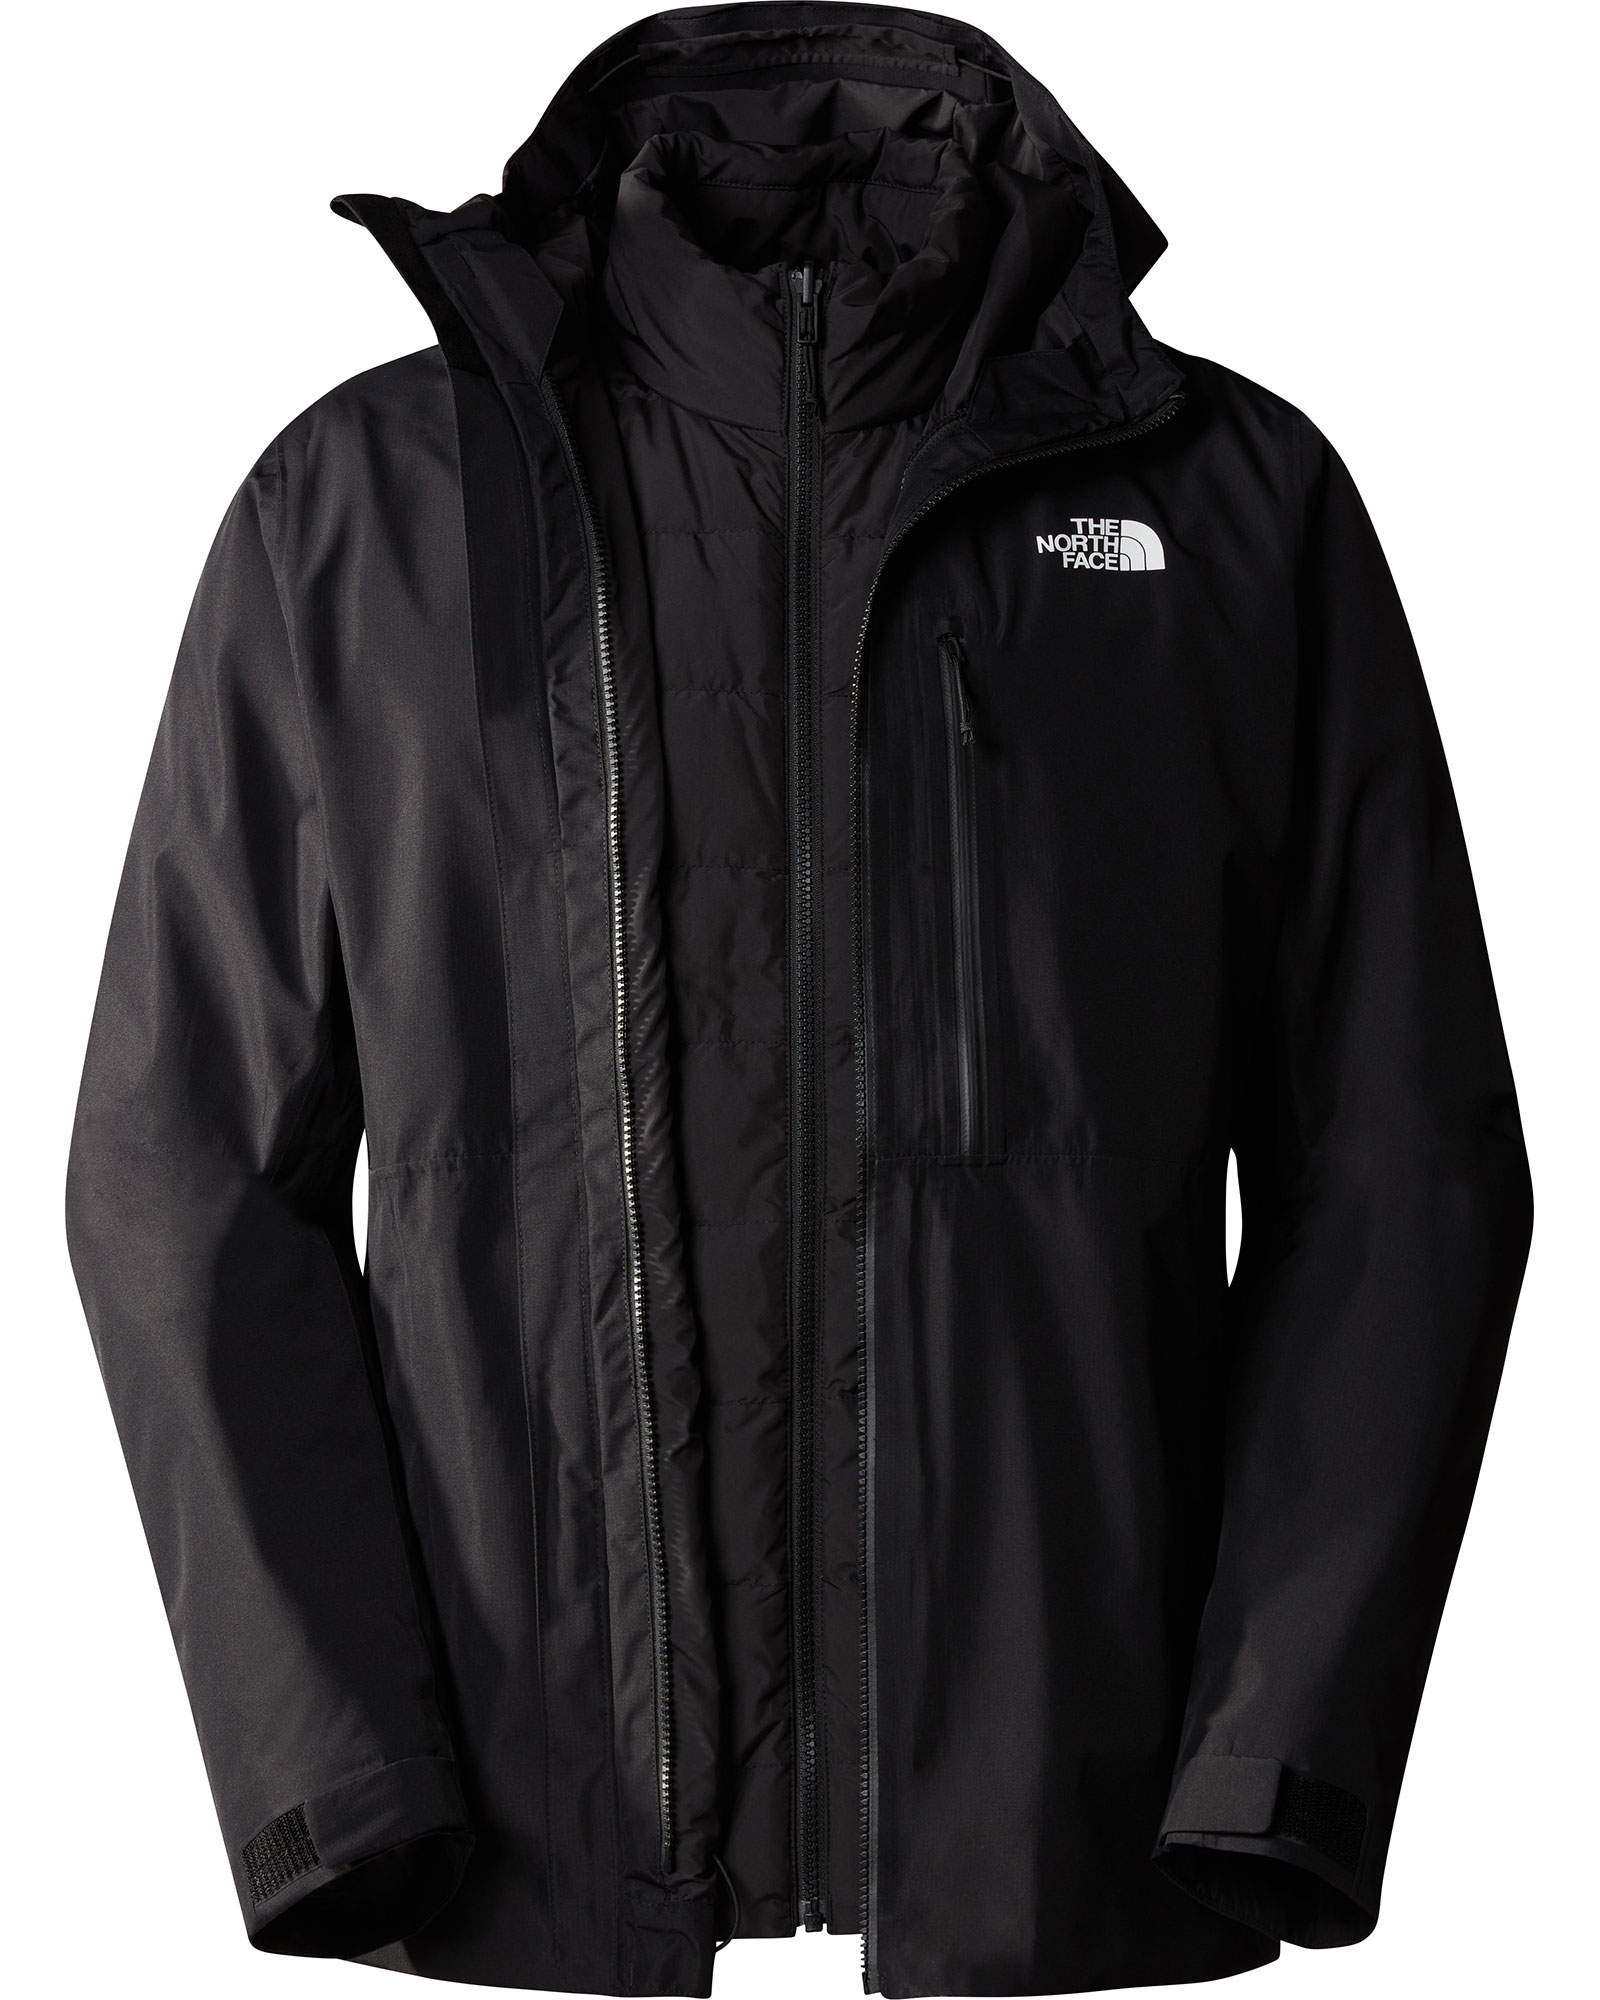 The North Face Men’s North Table Down Triclimate Jacket - TNF Black-TNF Black XL